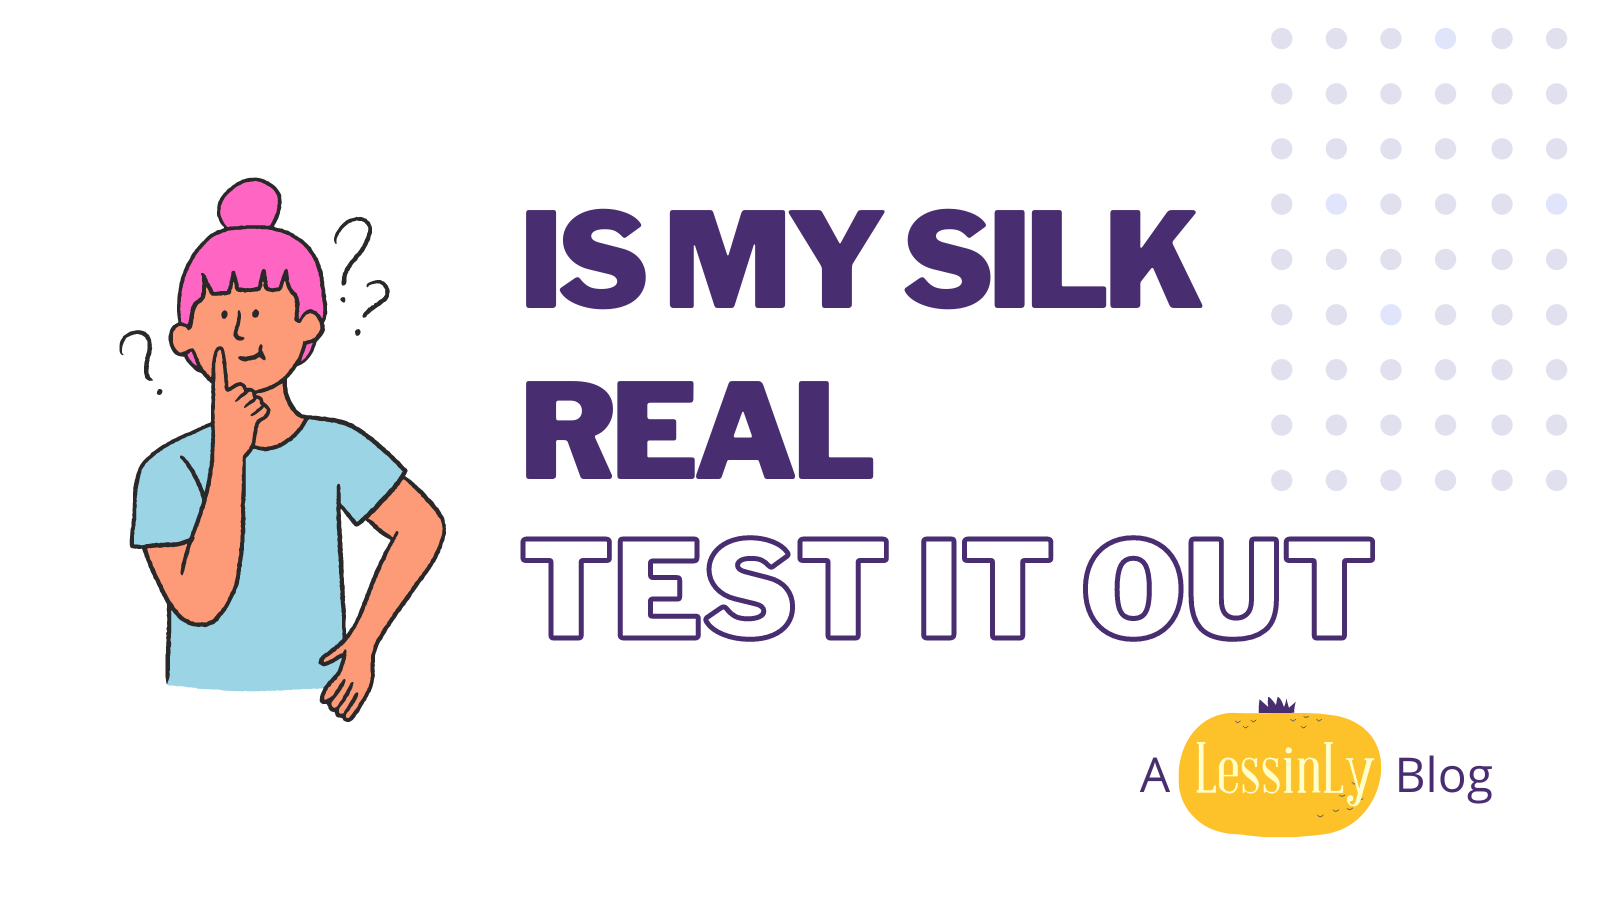 Many “Real Silk Tests” Are Wrong featured image - Lessinly Silk Blog